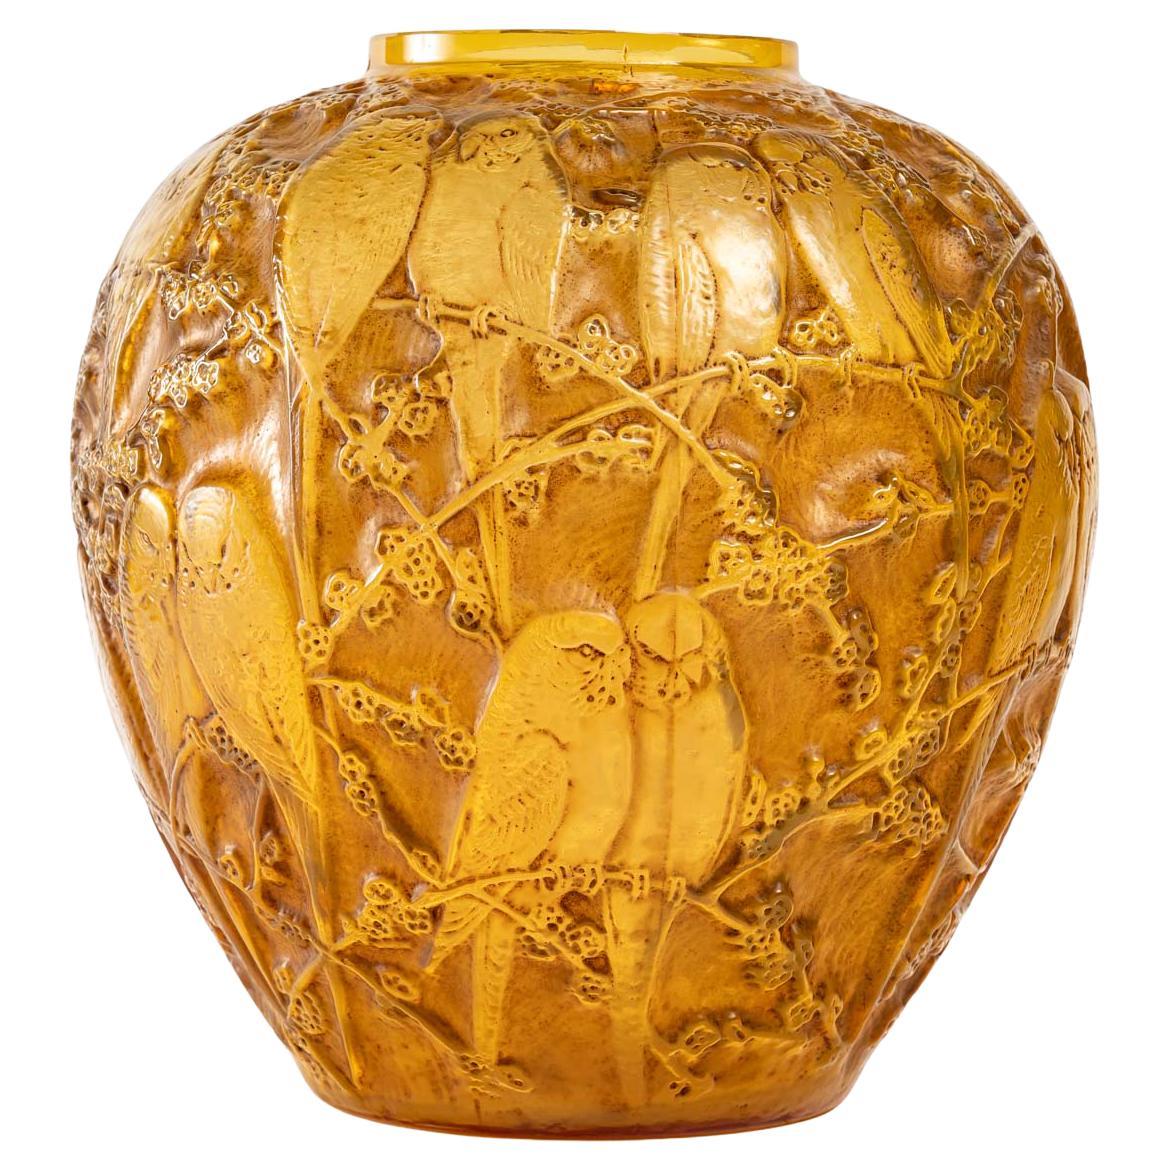 1919 Rene Lalique Perruches Vase Cased Butterscotch Glass with Sepia Patina